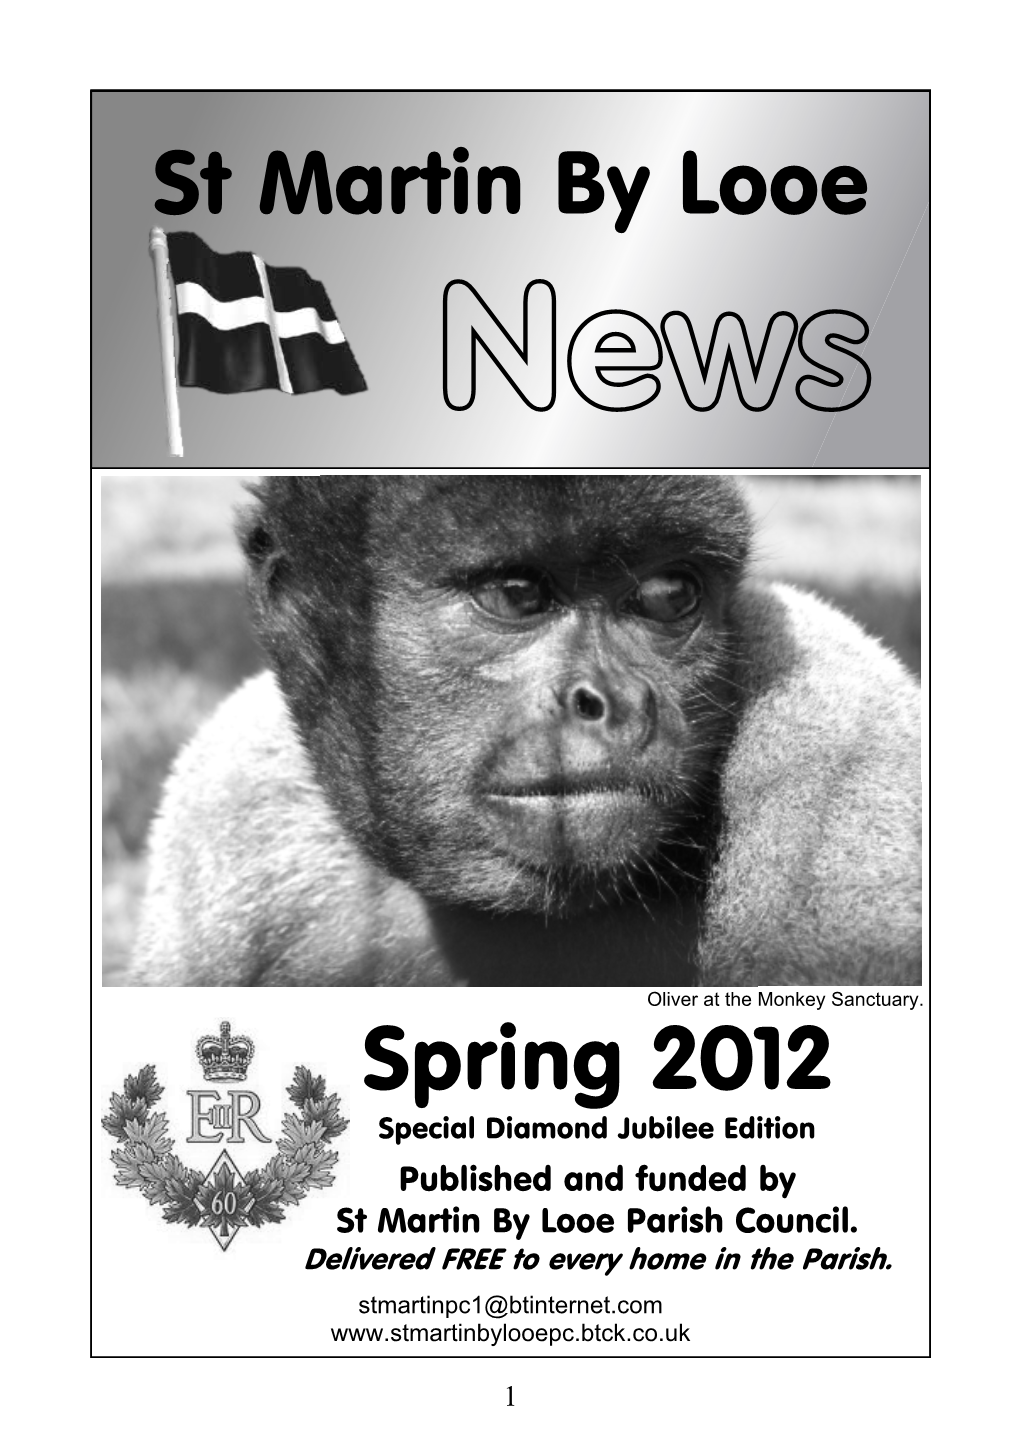 Spring 2012 Special Diamond Jubilee Edition Published and Funded by St Martin by Looe Parish Council